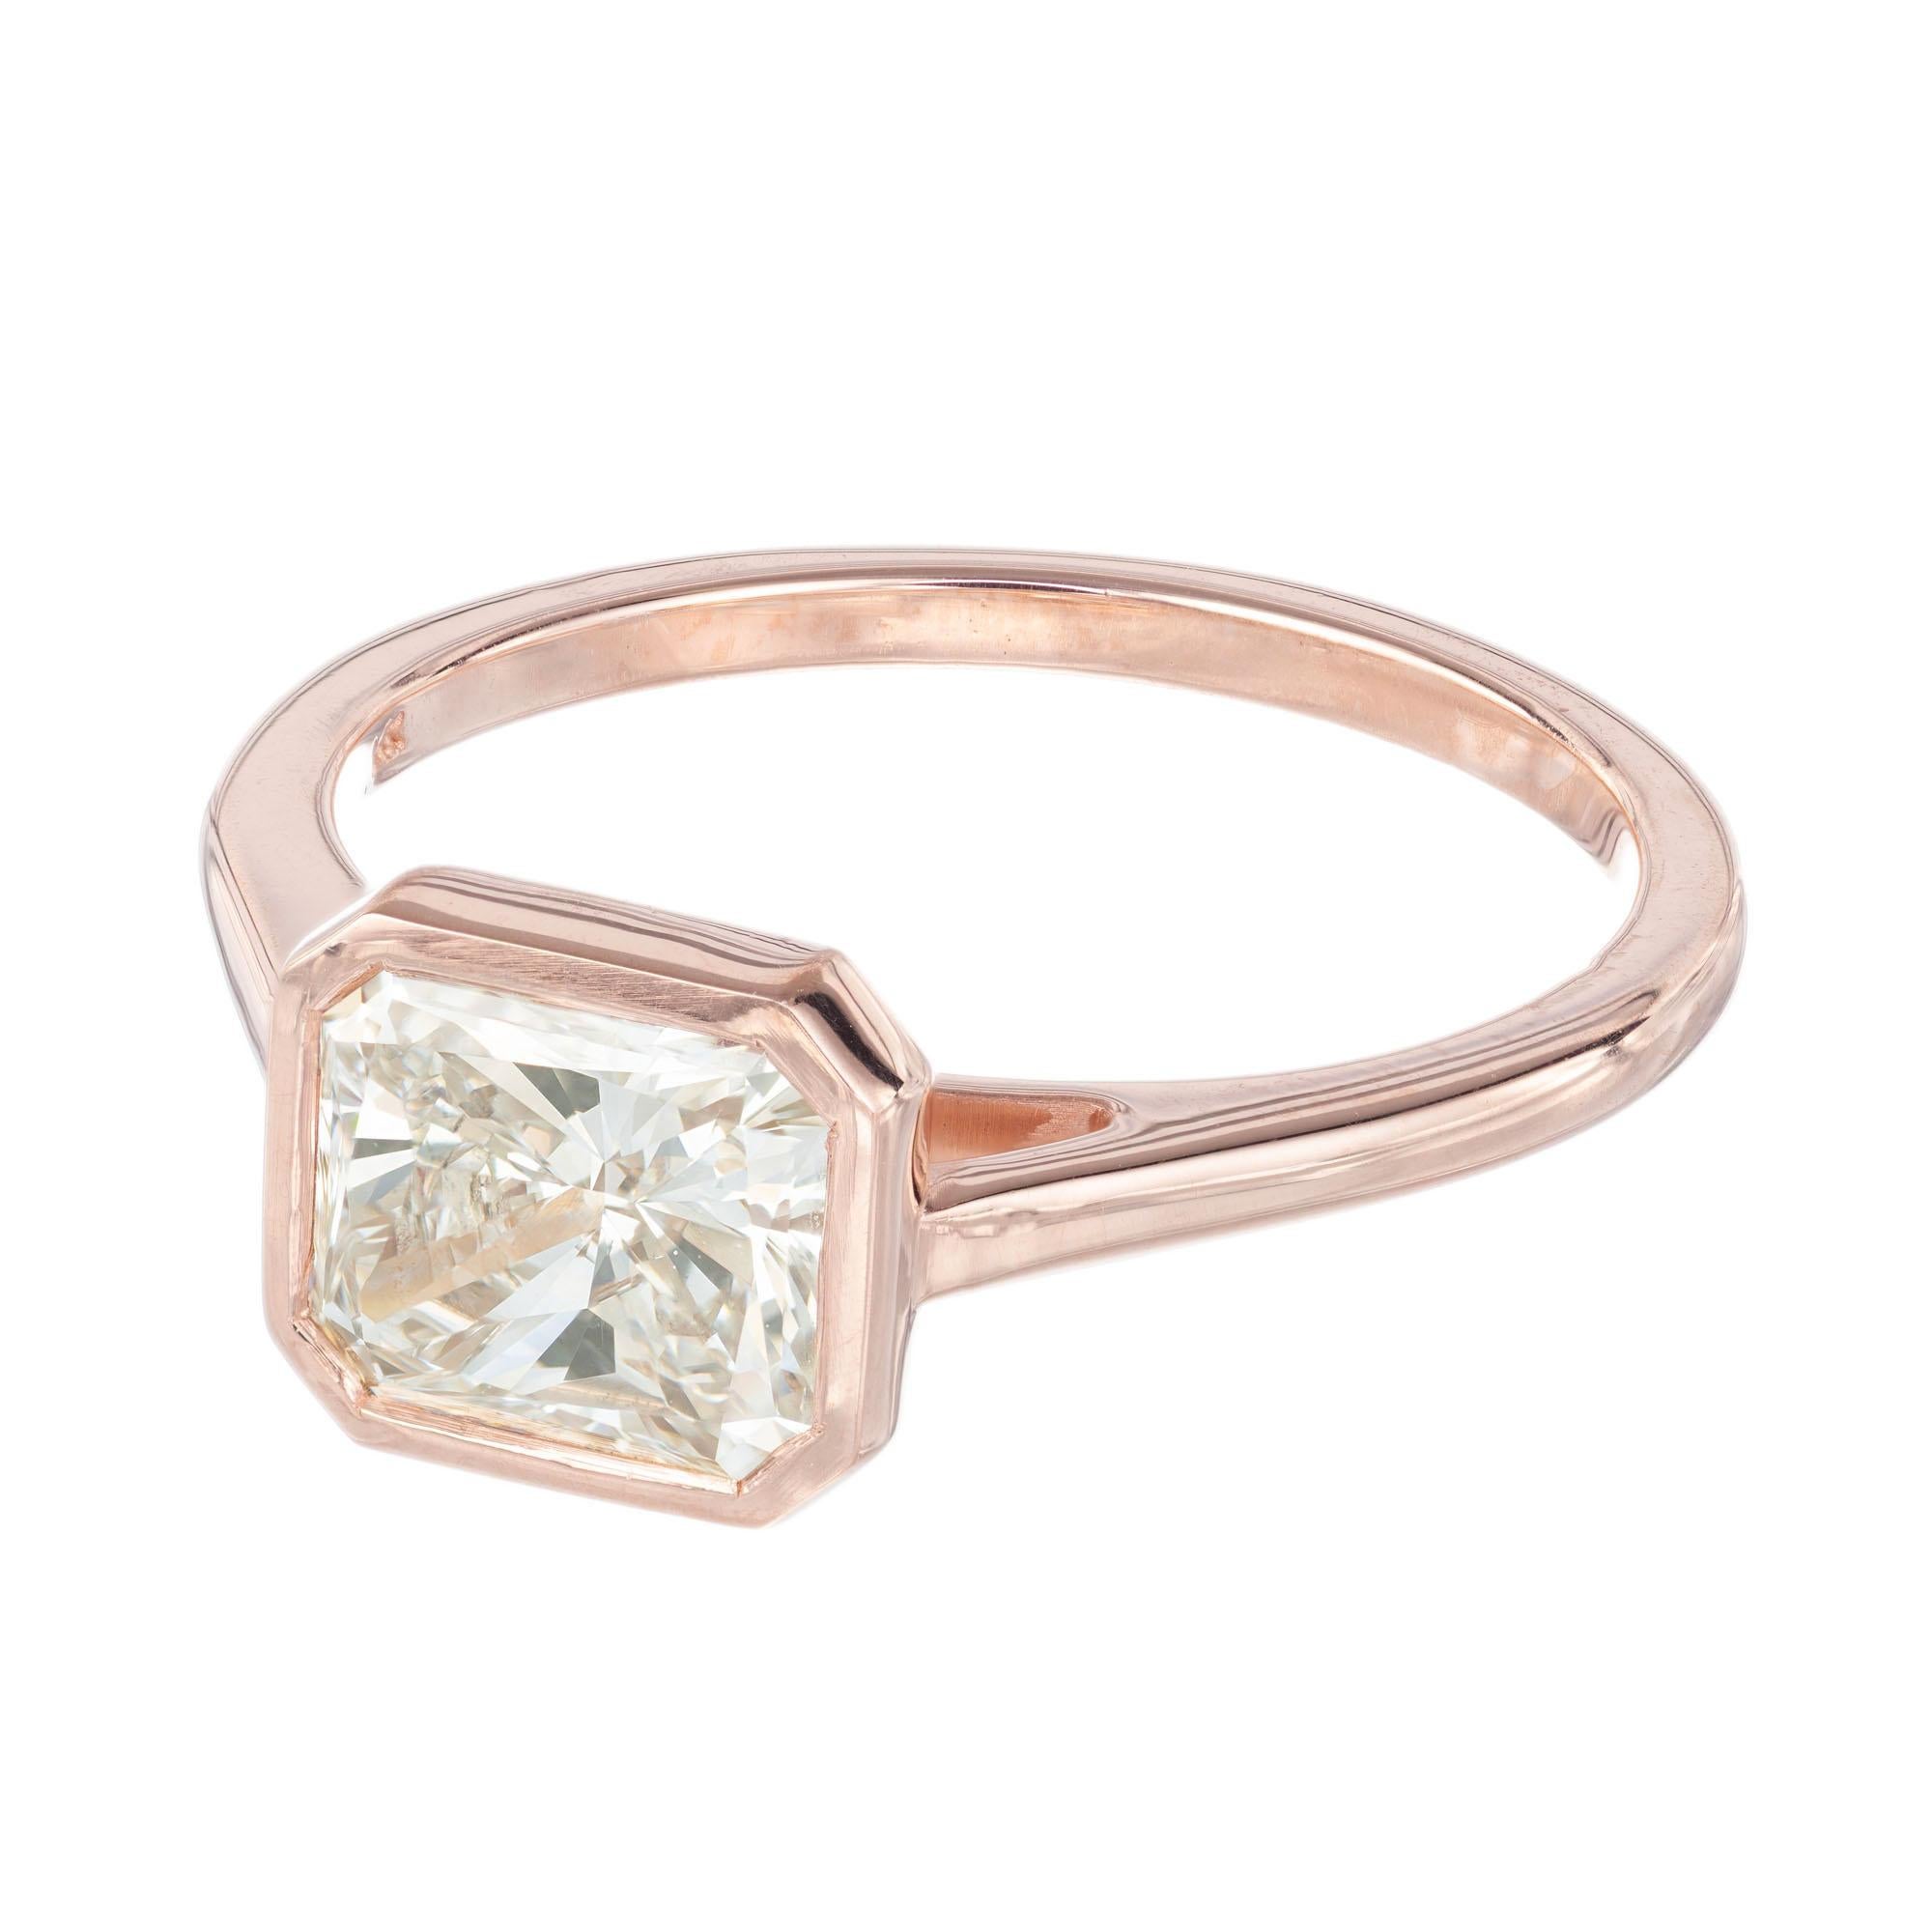 Brilliant Cut Peter Suchy GIA Certified 1.51 Carat Diamond Rose Gold Engagement Ring For Sale